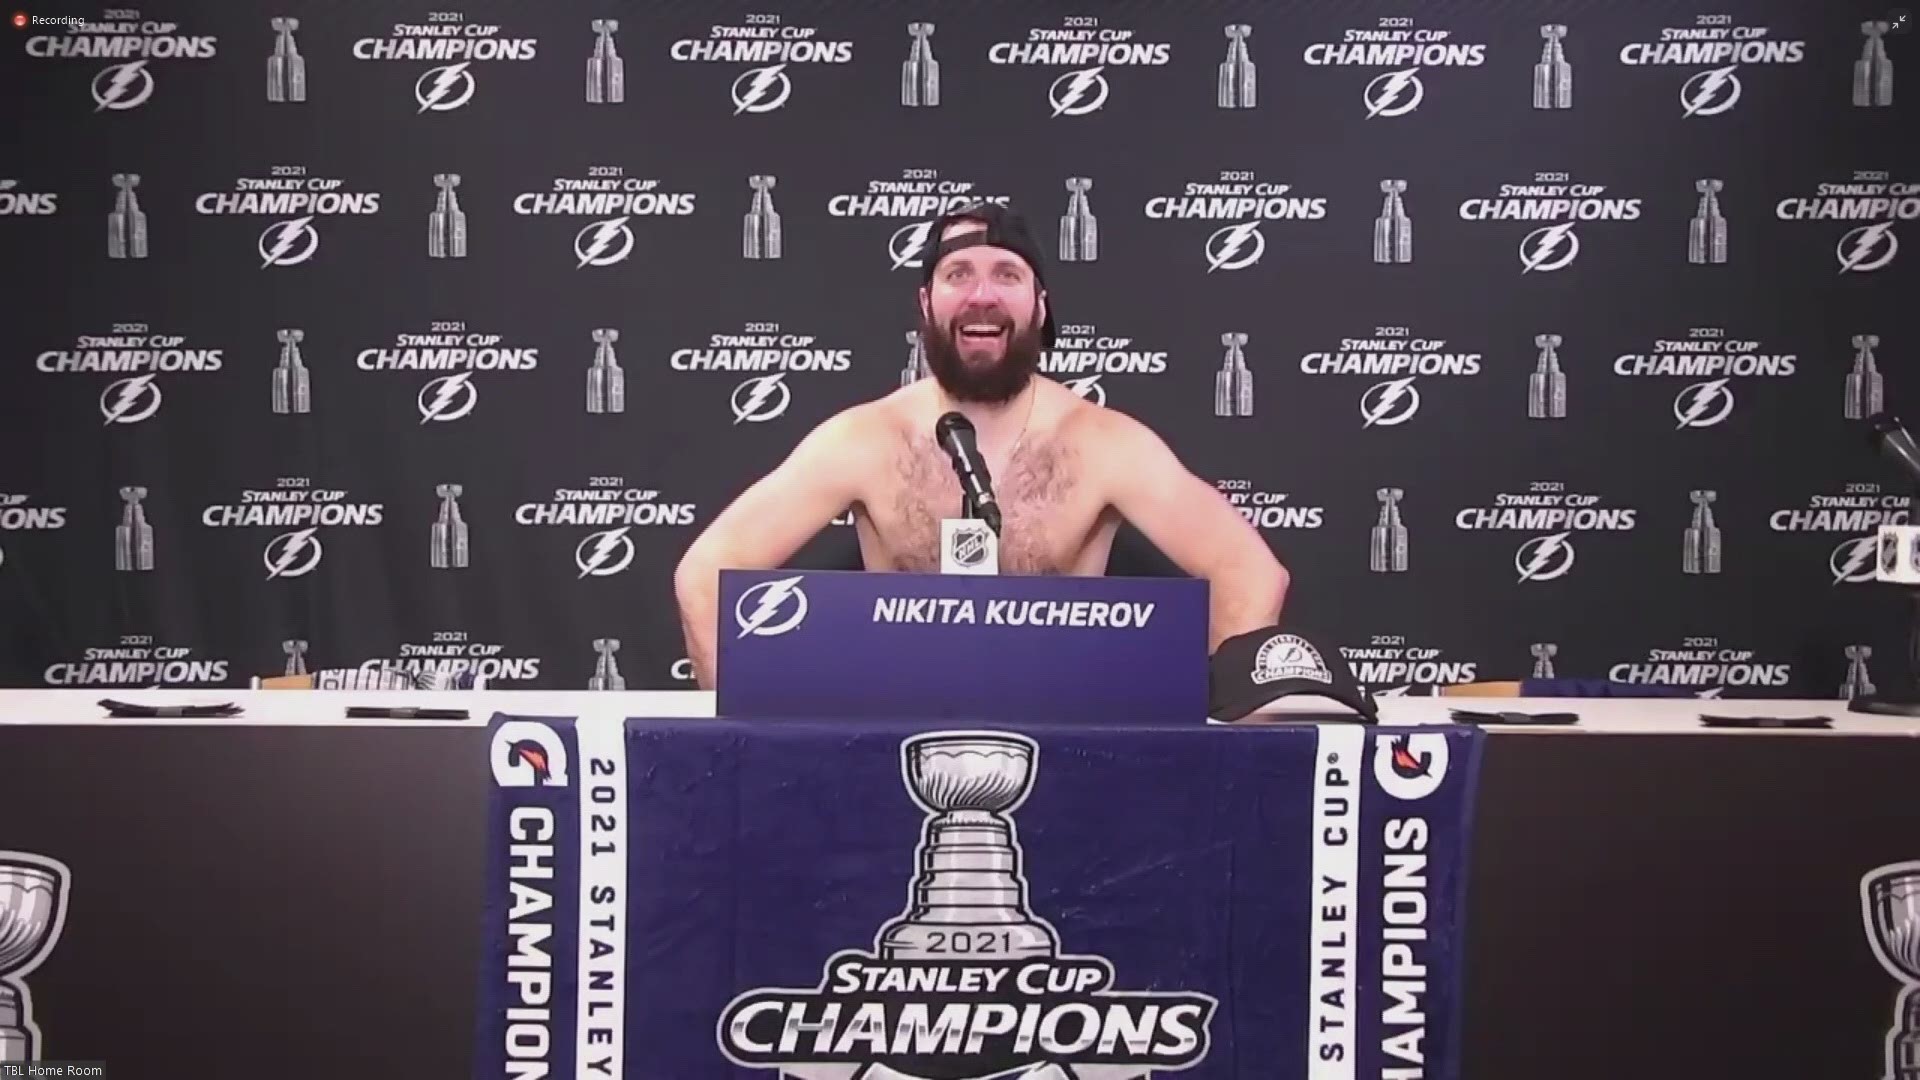 Nikita Kucherov gave a shirtless postgame press conference while drinking Bud Lite after the Lightning's Stanley Cup win.